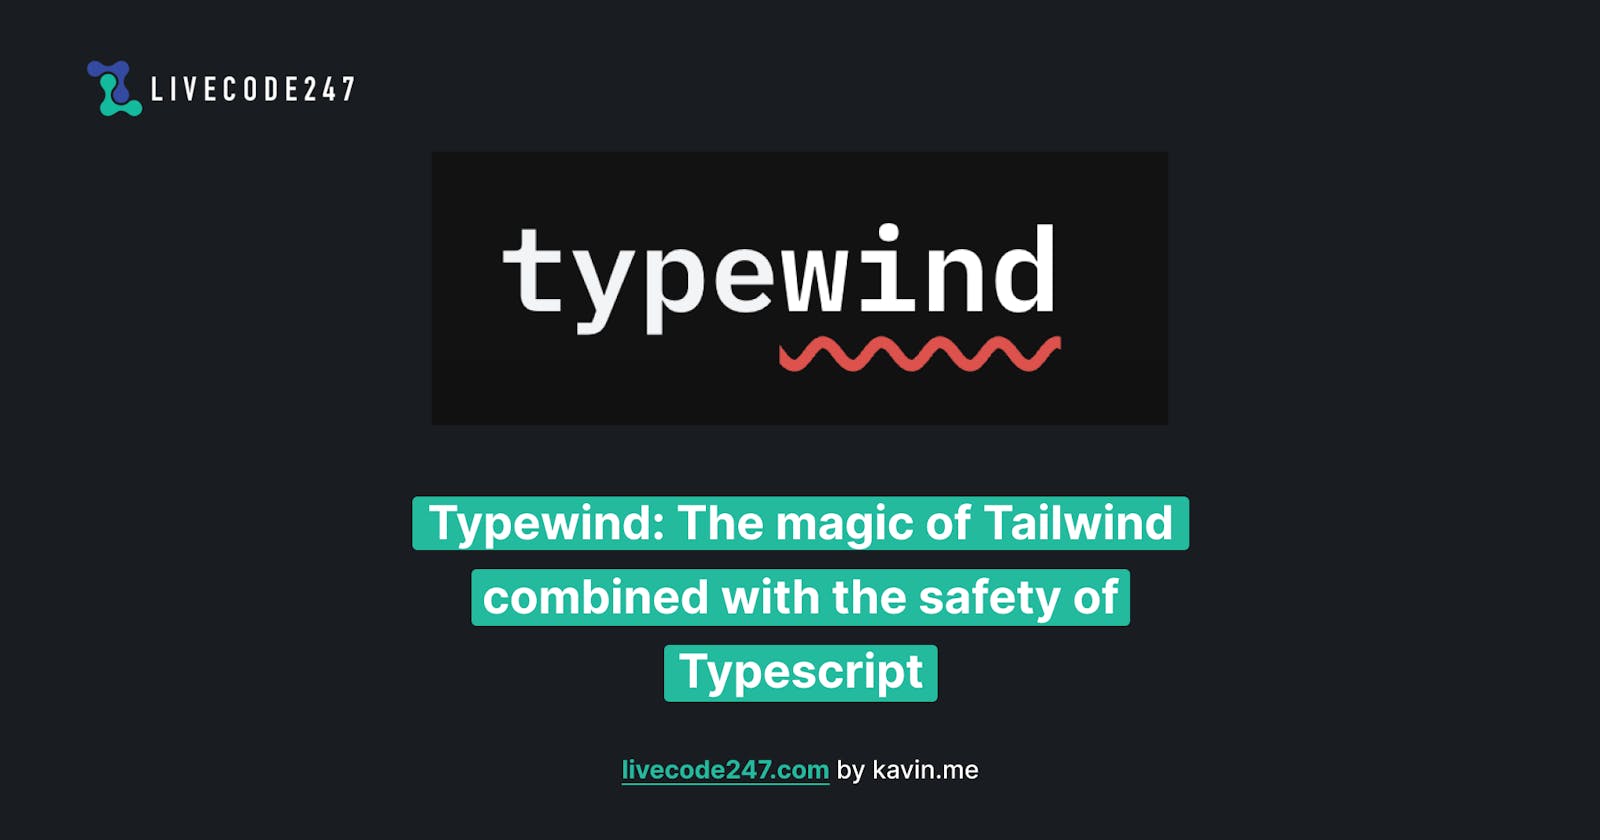 Typewind: The magic of Tailwind combined with the safety of Typescript